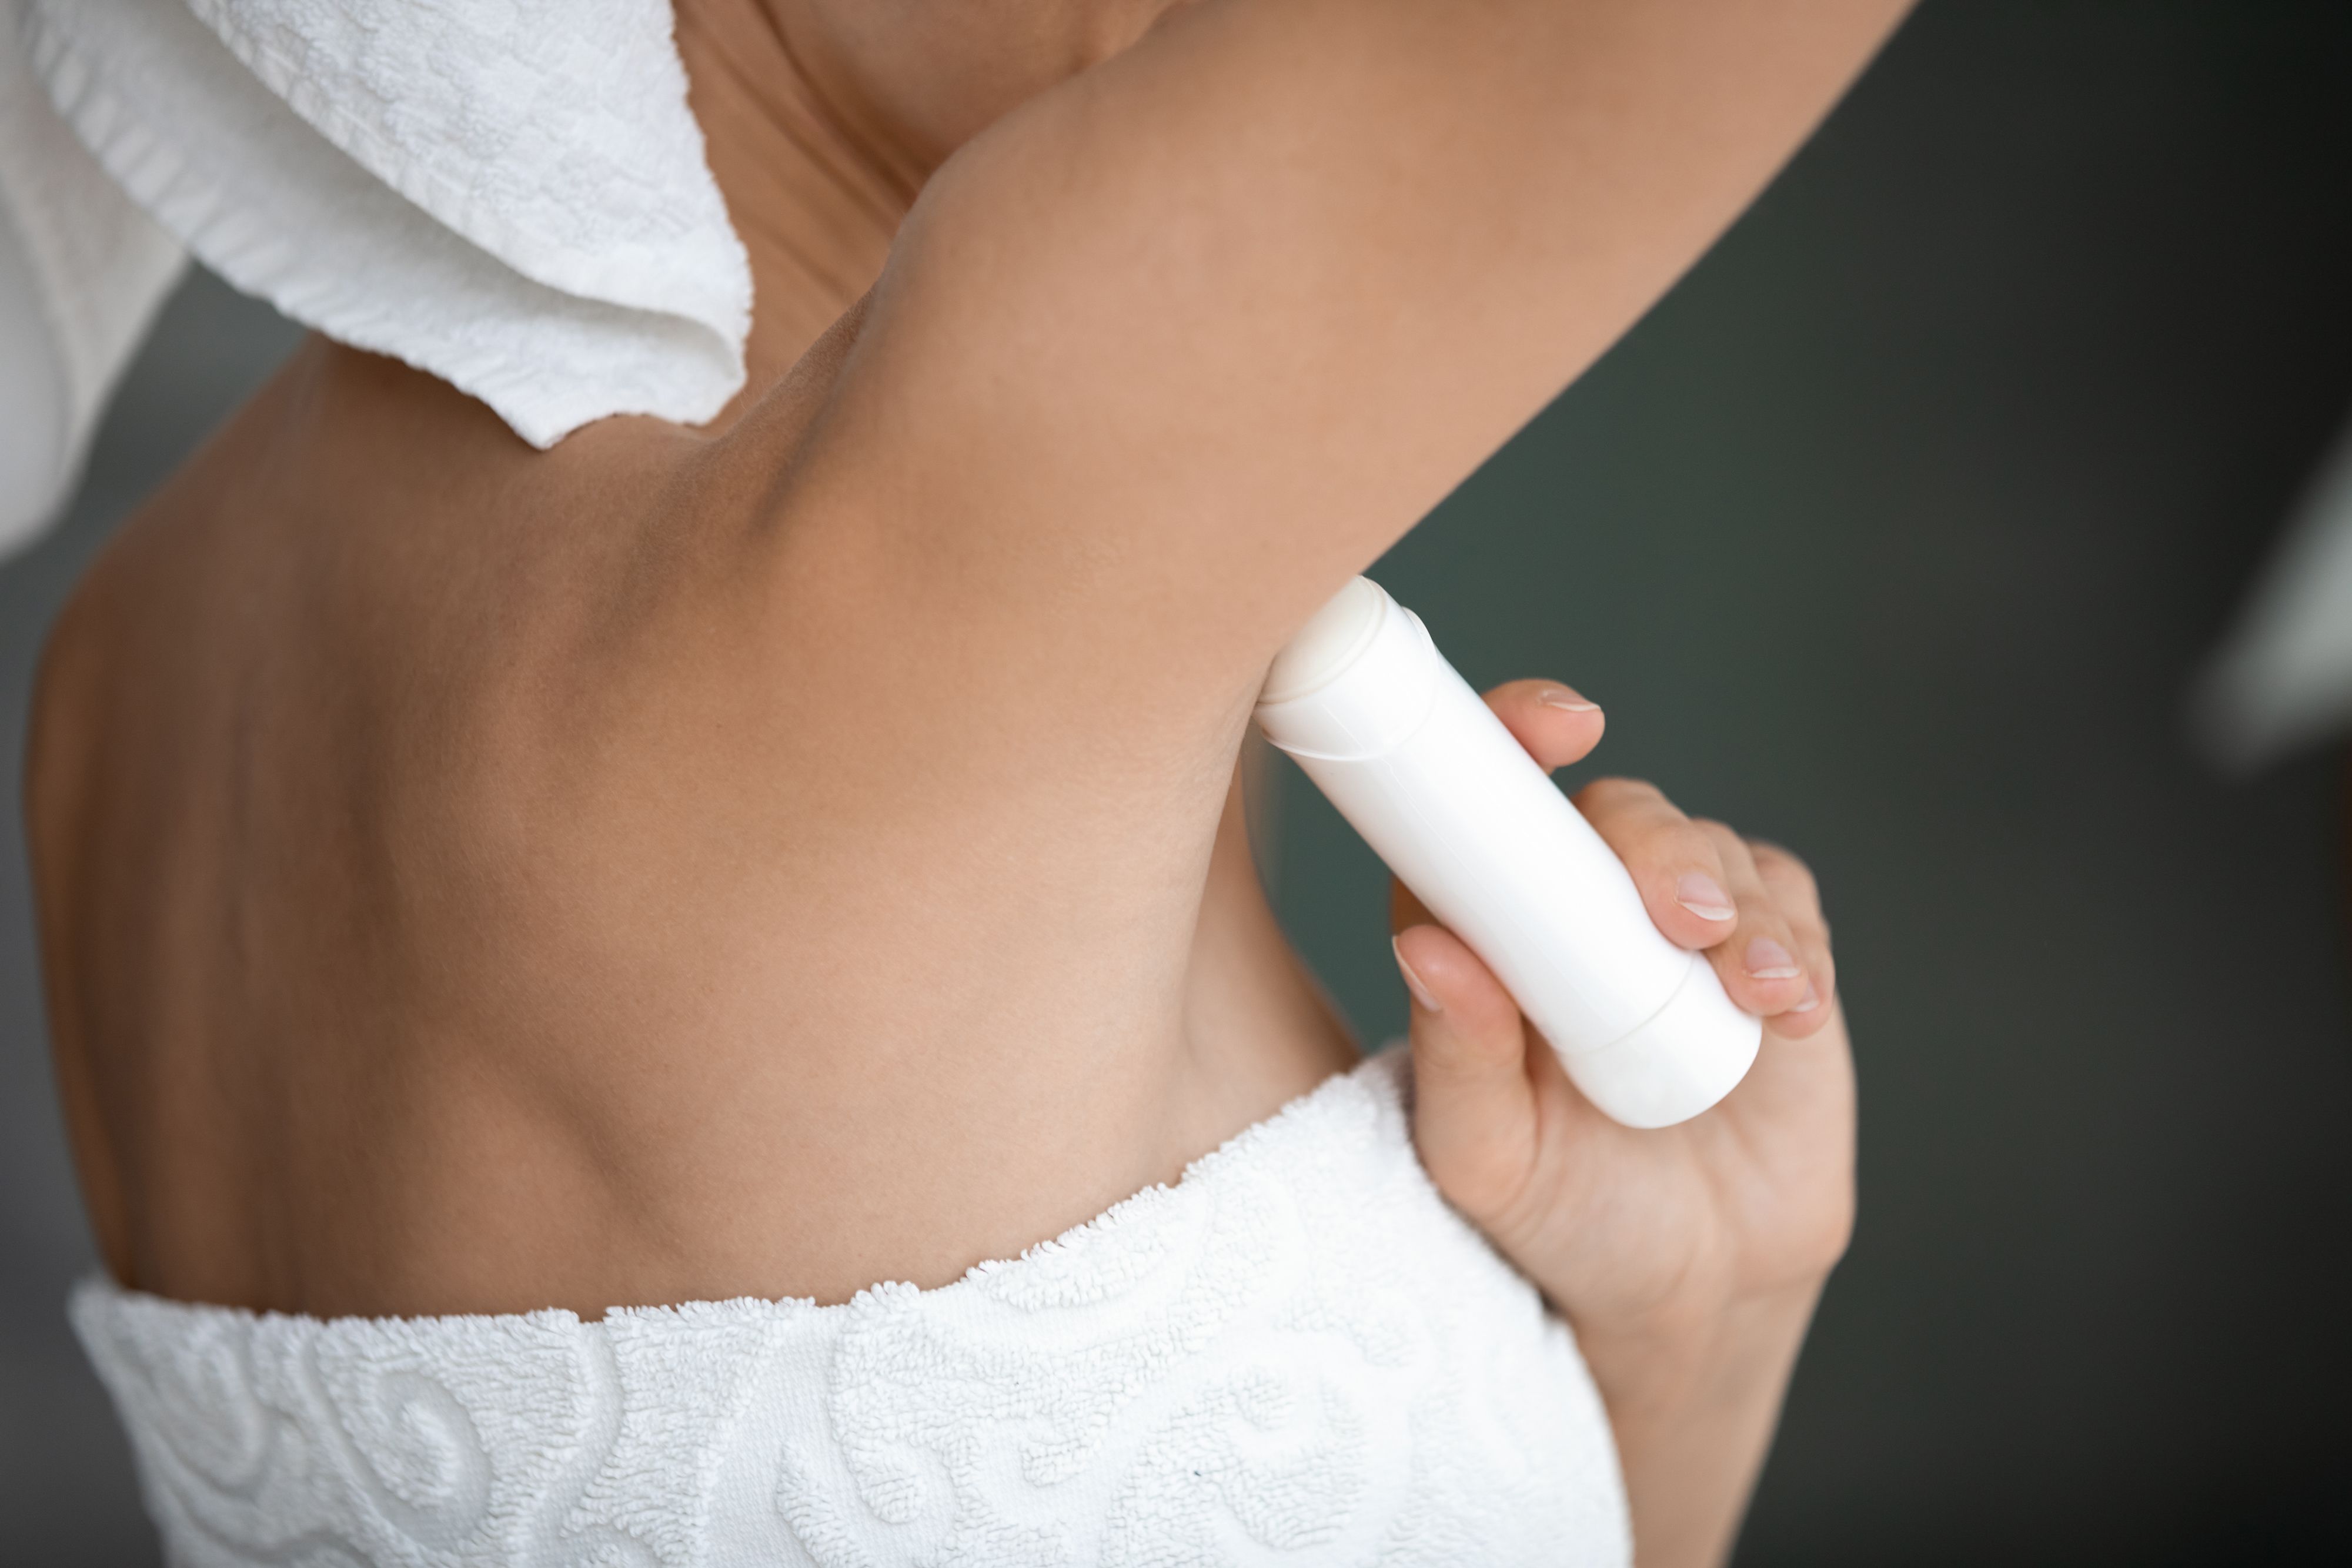 Do you really need deodorant? Experts weigh in